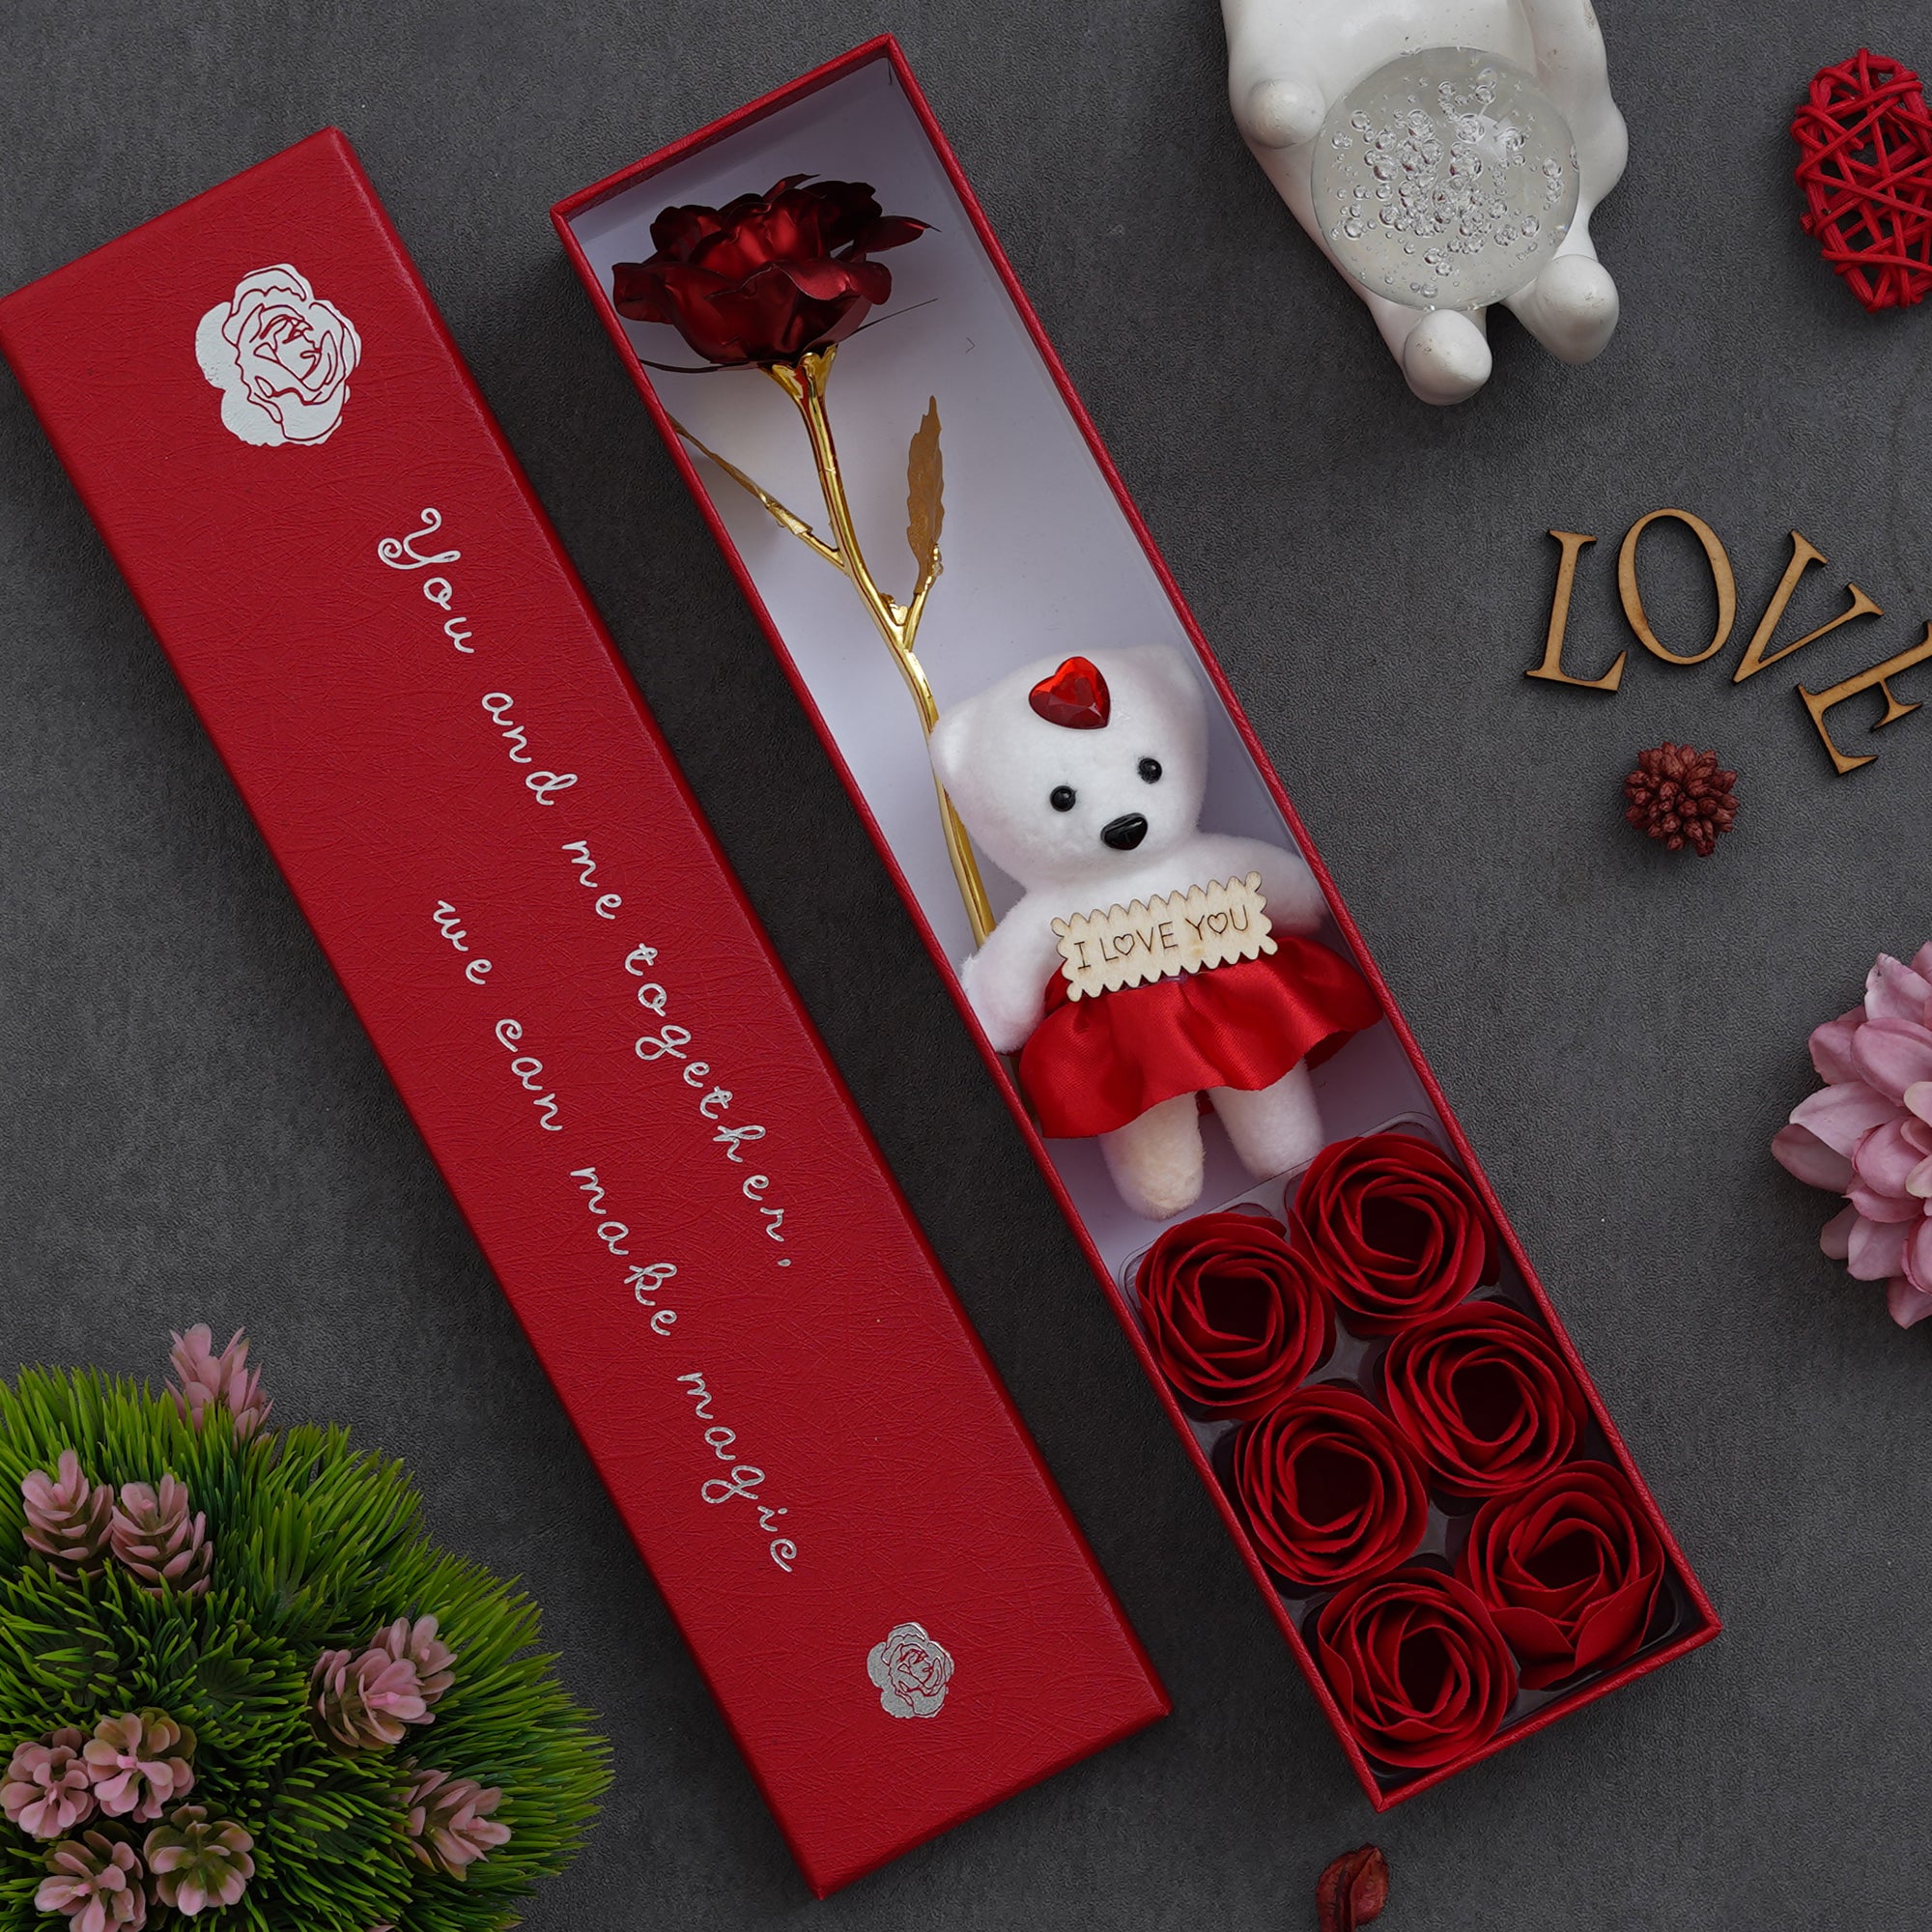 Valentine Combo of Set of 8 Love Post Cards Gift Cards Set, Red Gift Box with Teddy & Roses, "20 Reasons Why I Need You" Printed on Little Hearts Wooden Gift Set 3